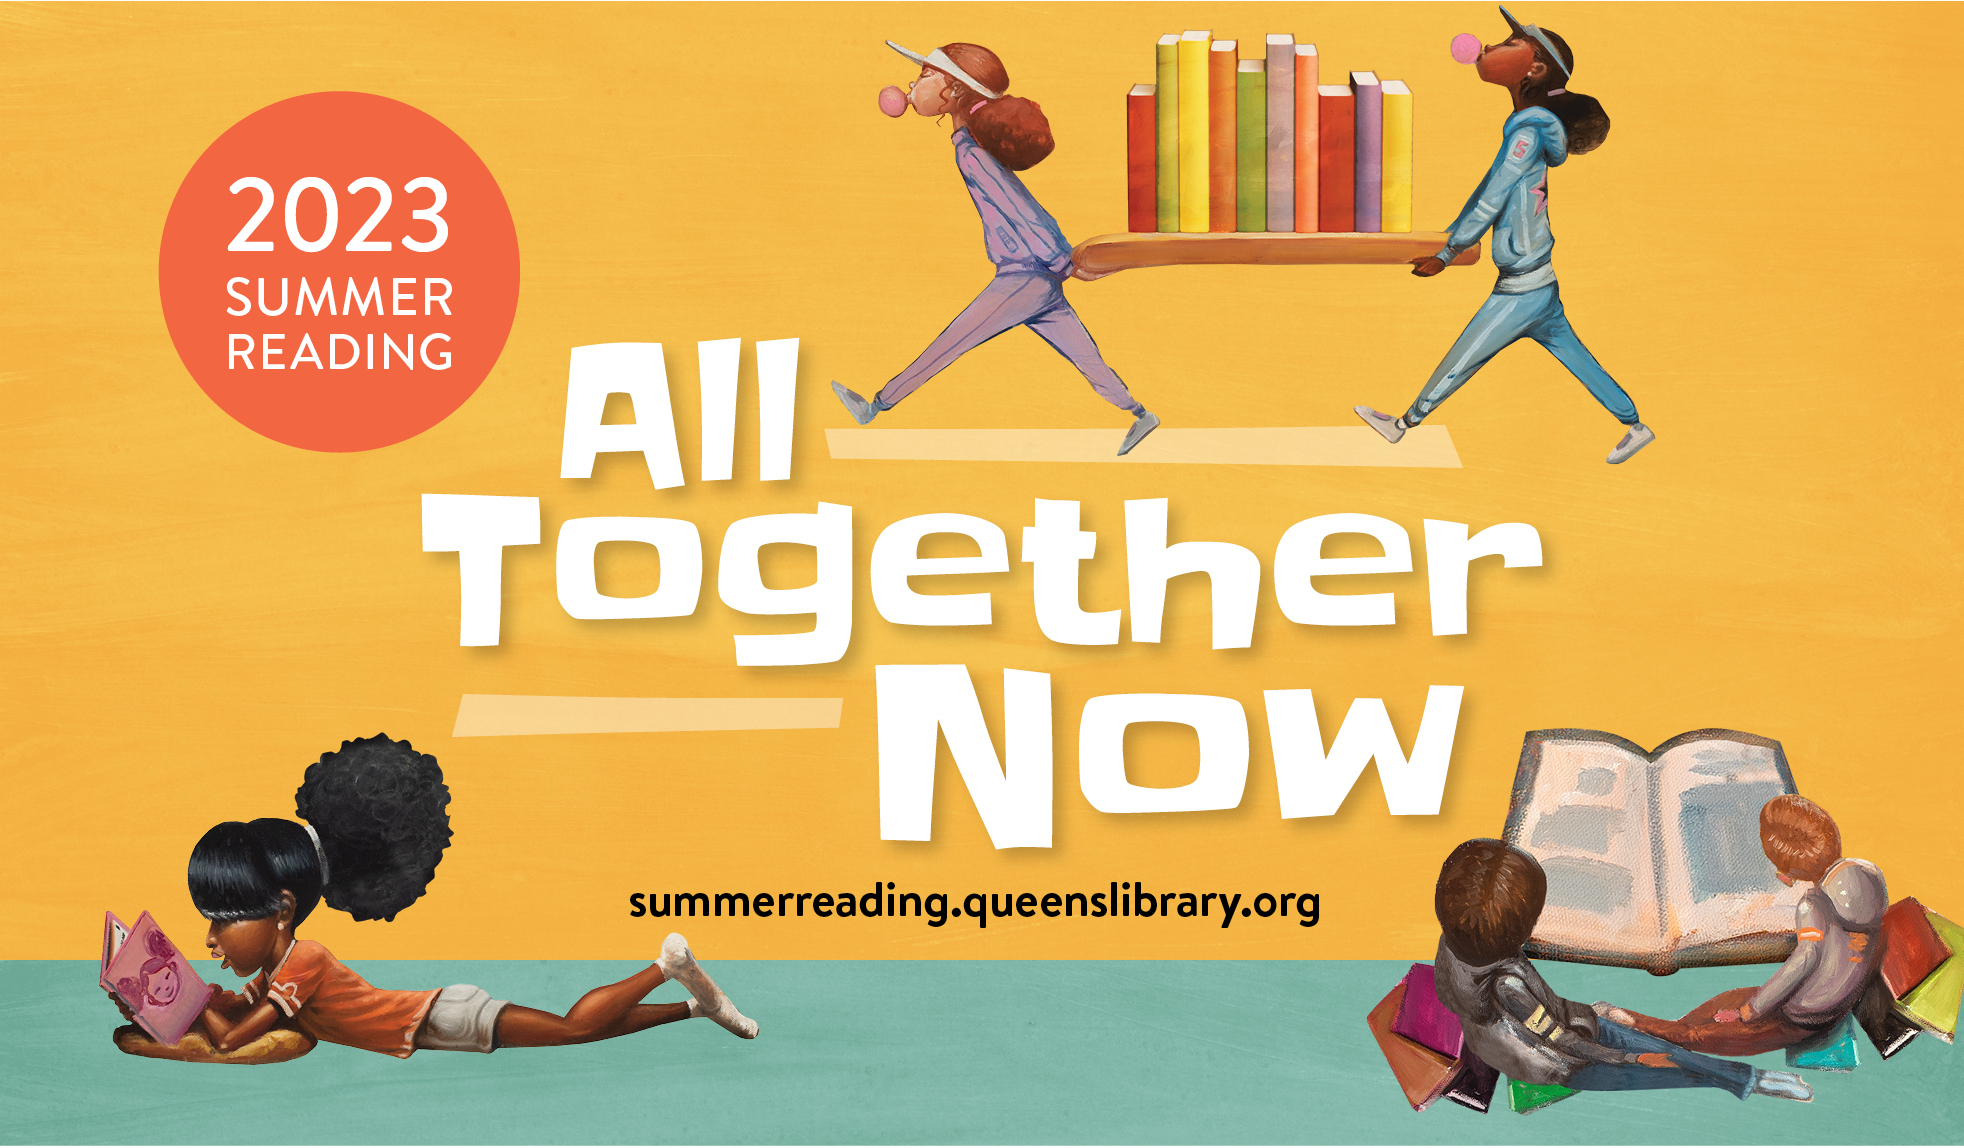 Don't miss our Summer Reading Kick-Off Events!